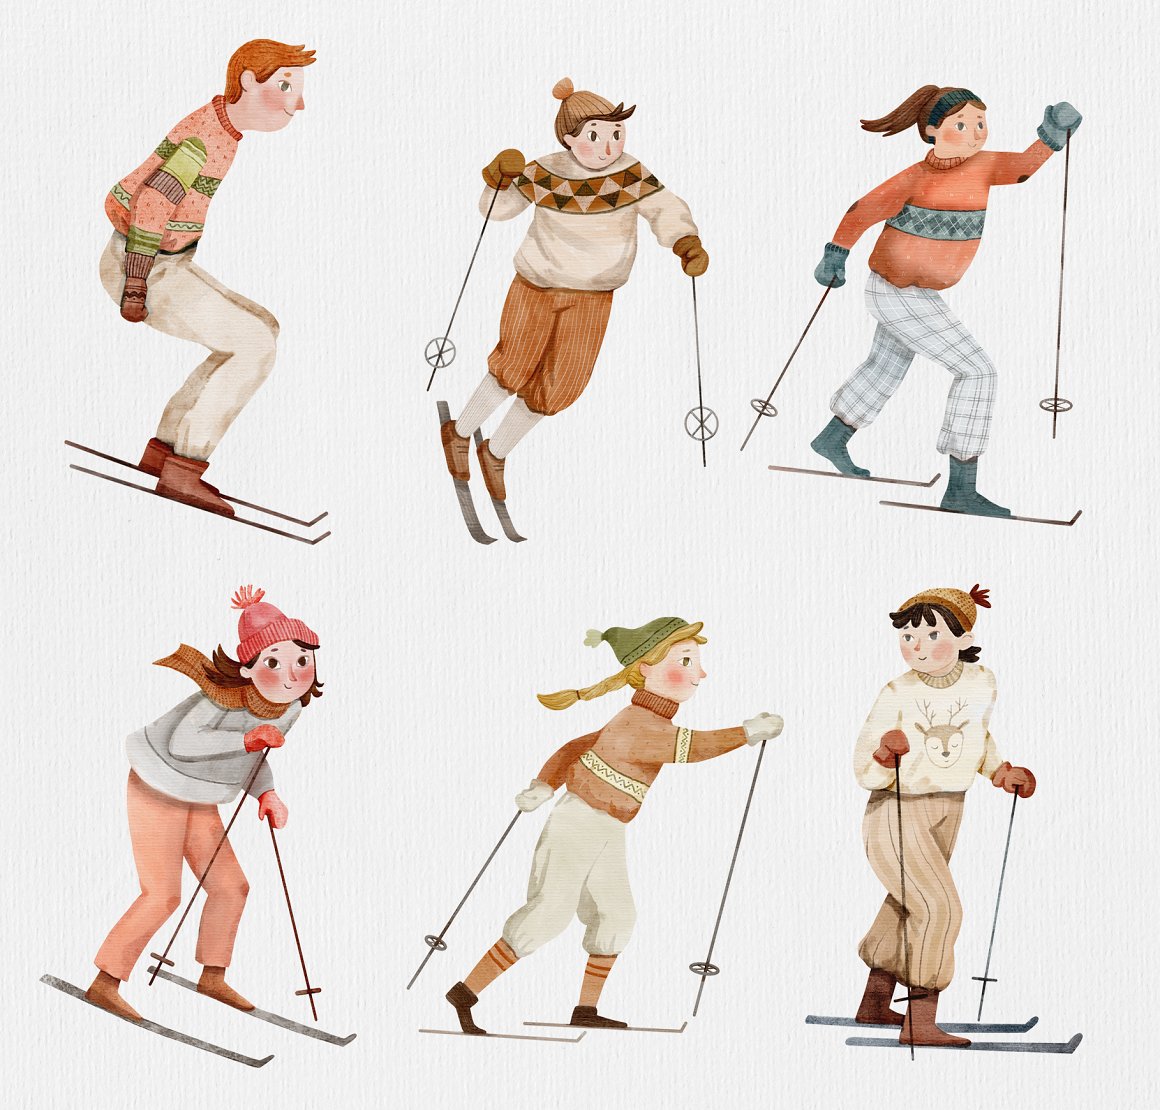 Clipart of 6 watercolor illustrations of a skier.